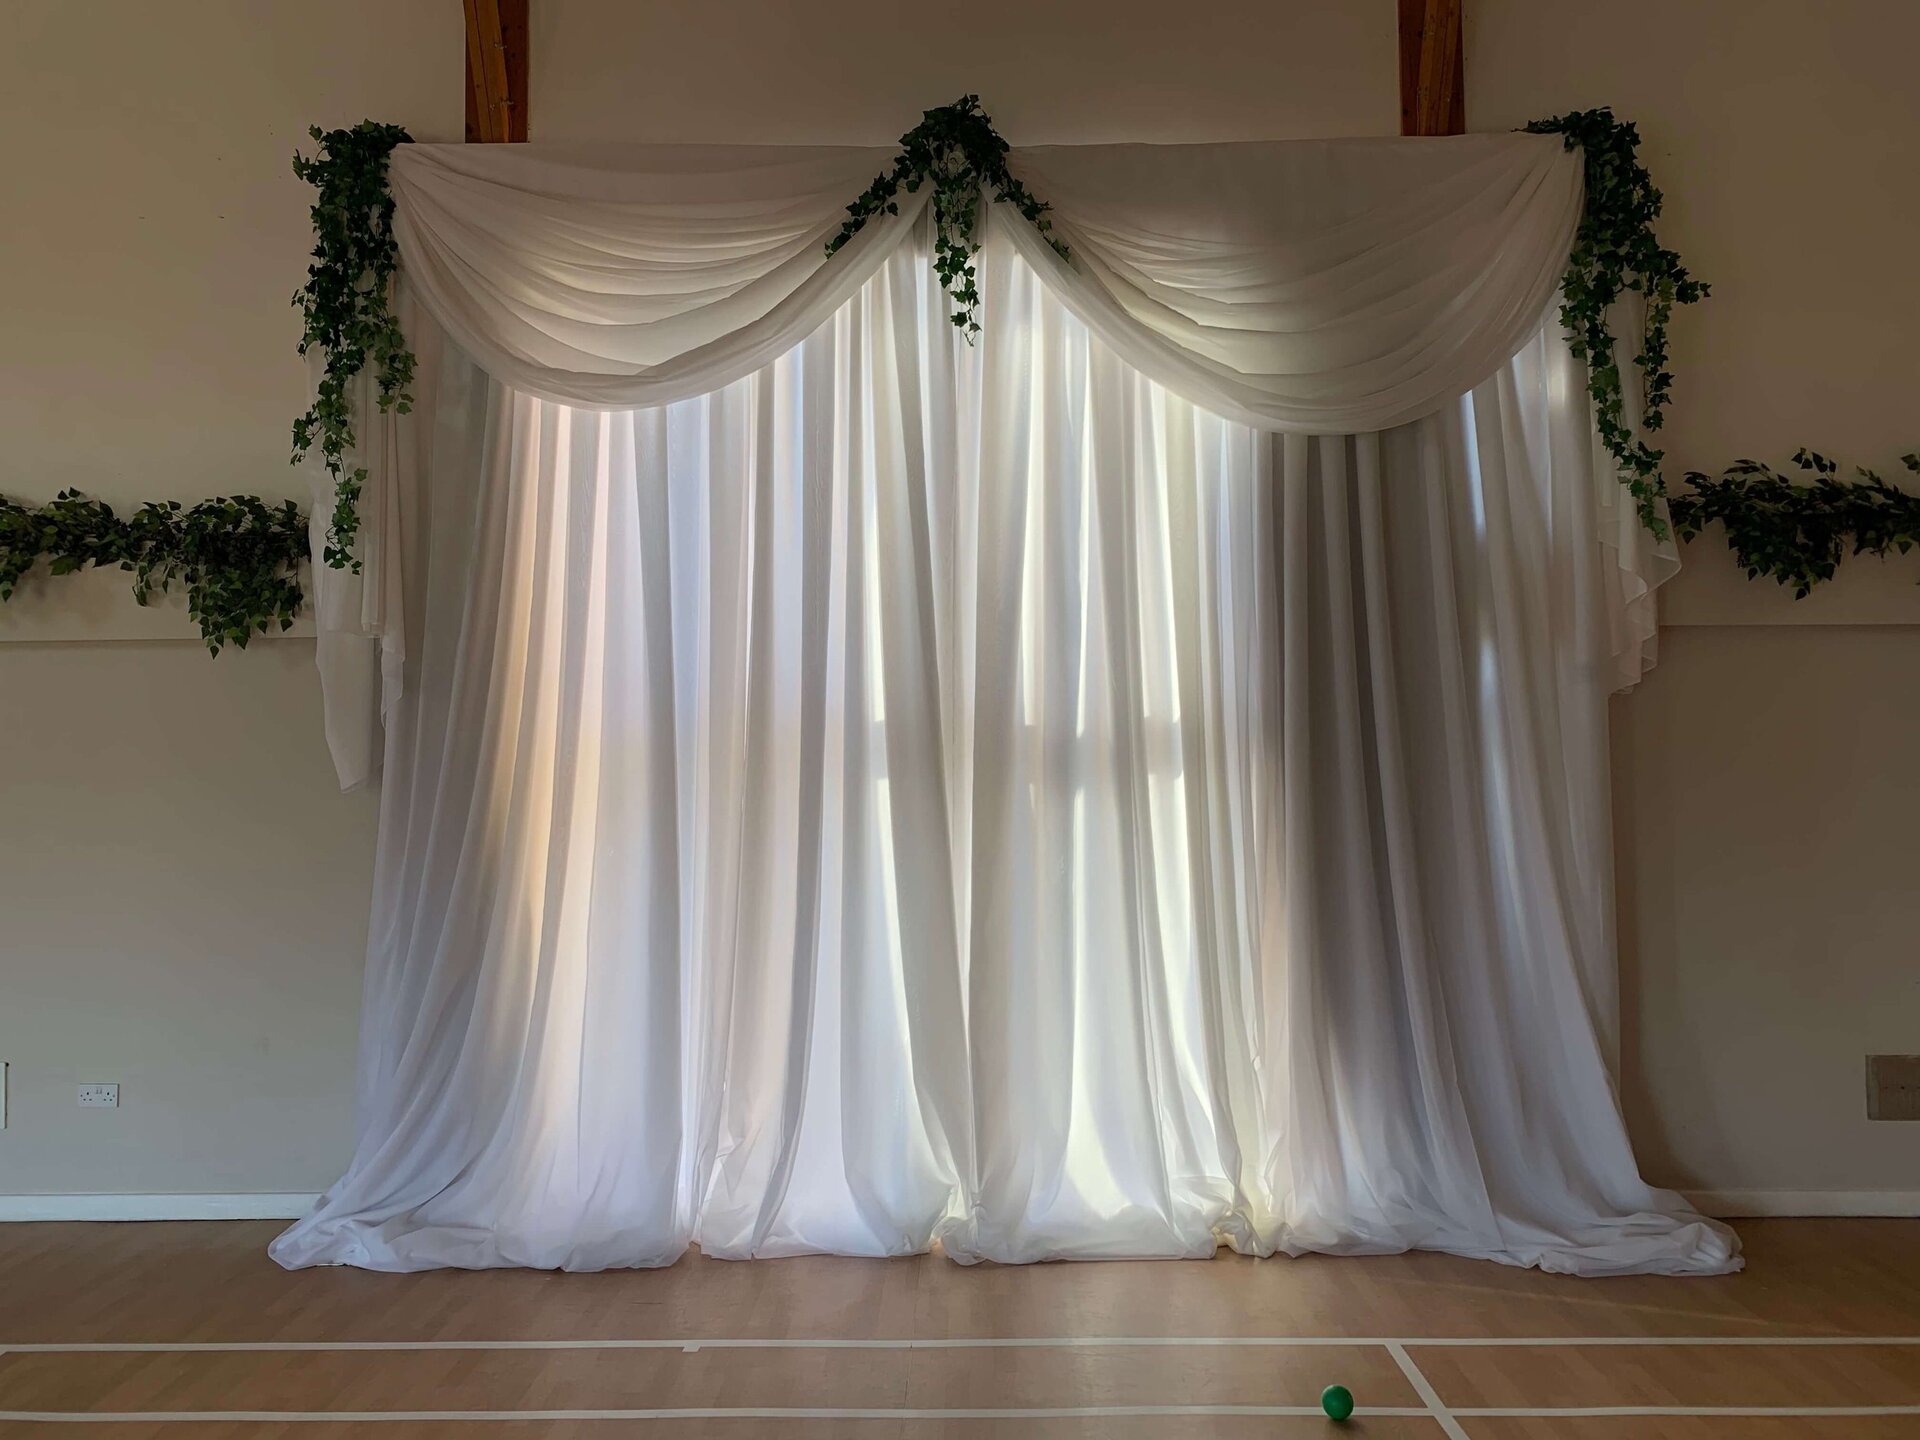 How To Drape Curtains For Backdrop